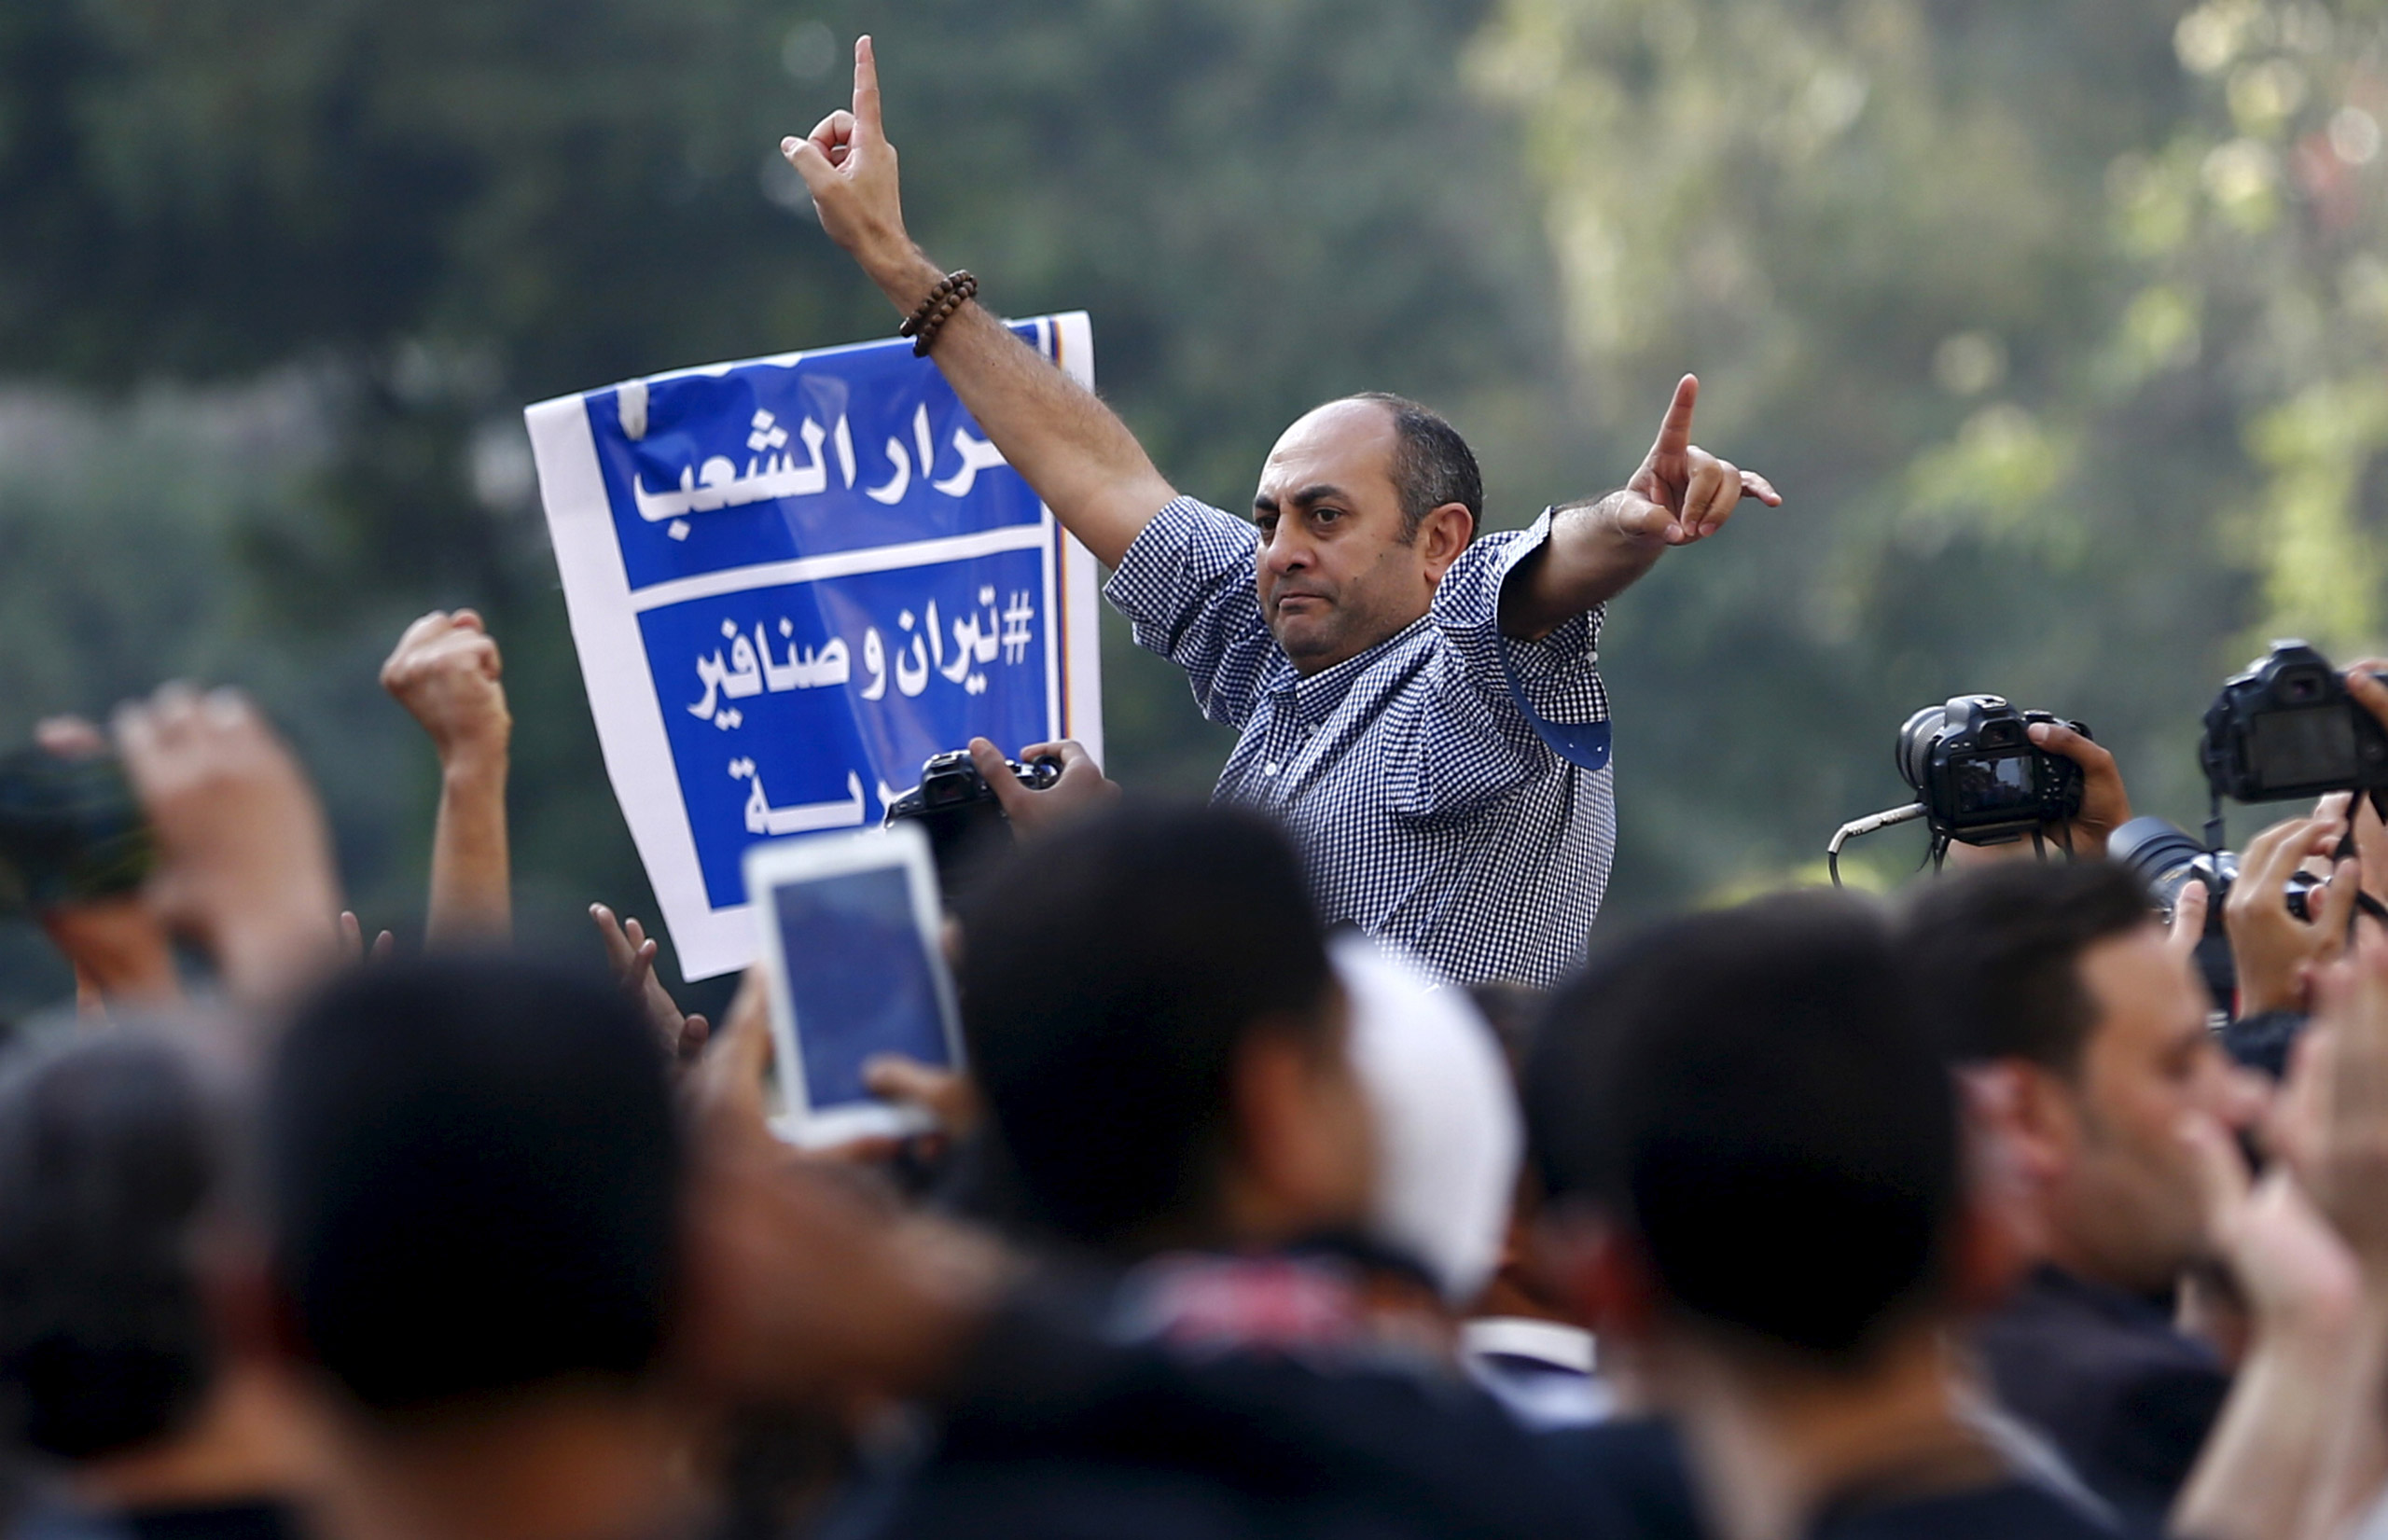 A former presidential candidate and lawyer Khaled Ali shouts slogans against President Abdel Fattah al-Sisi and the government during a demonstration in Cairo on April 15, 2016. (Amr Dalsh—Reuters)